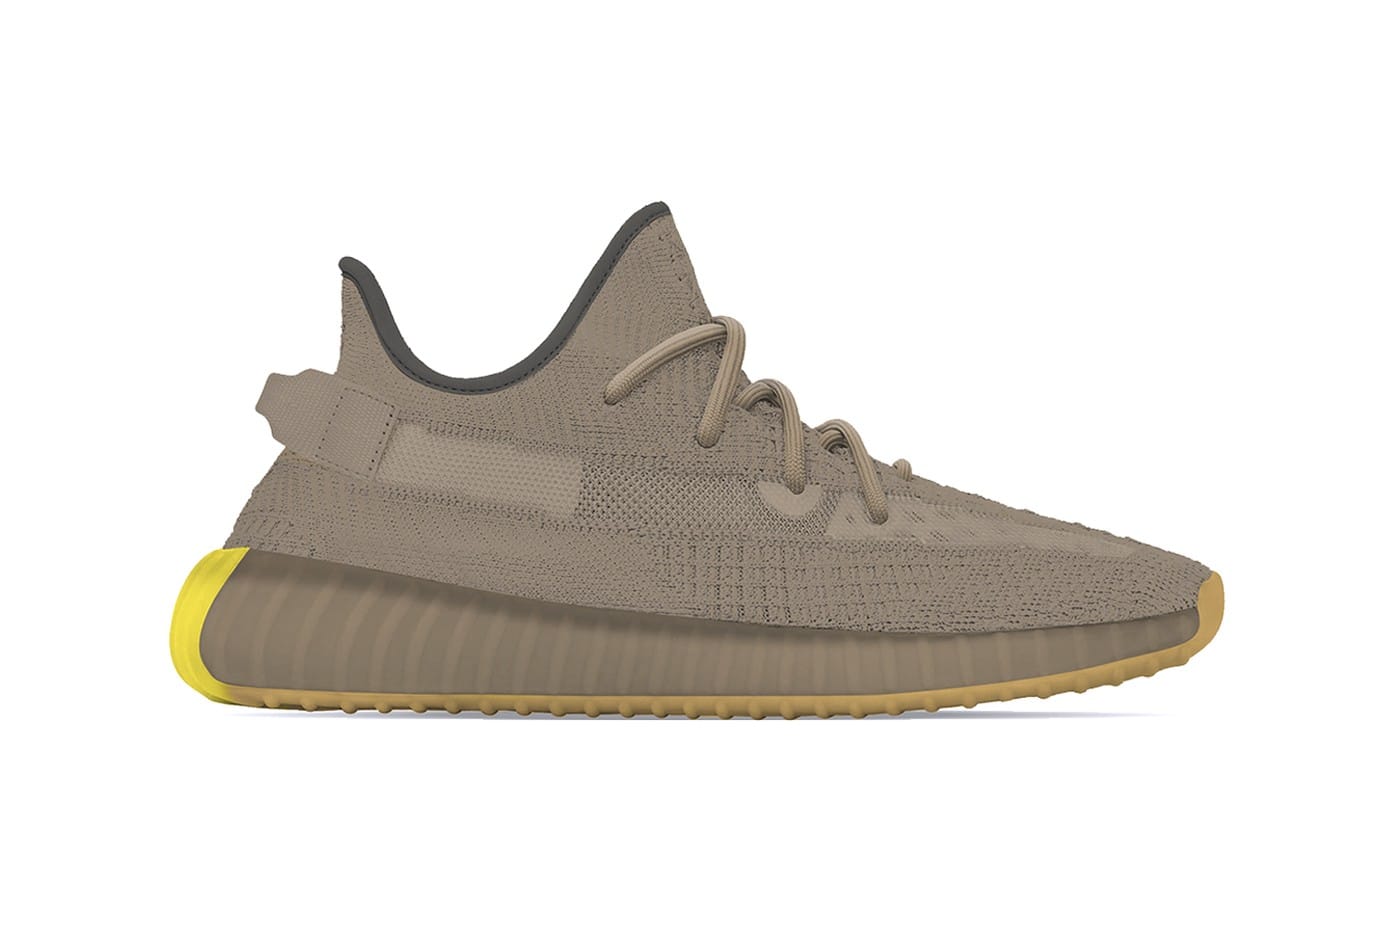 yeezy boost 350 v3 early 2019